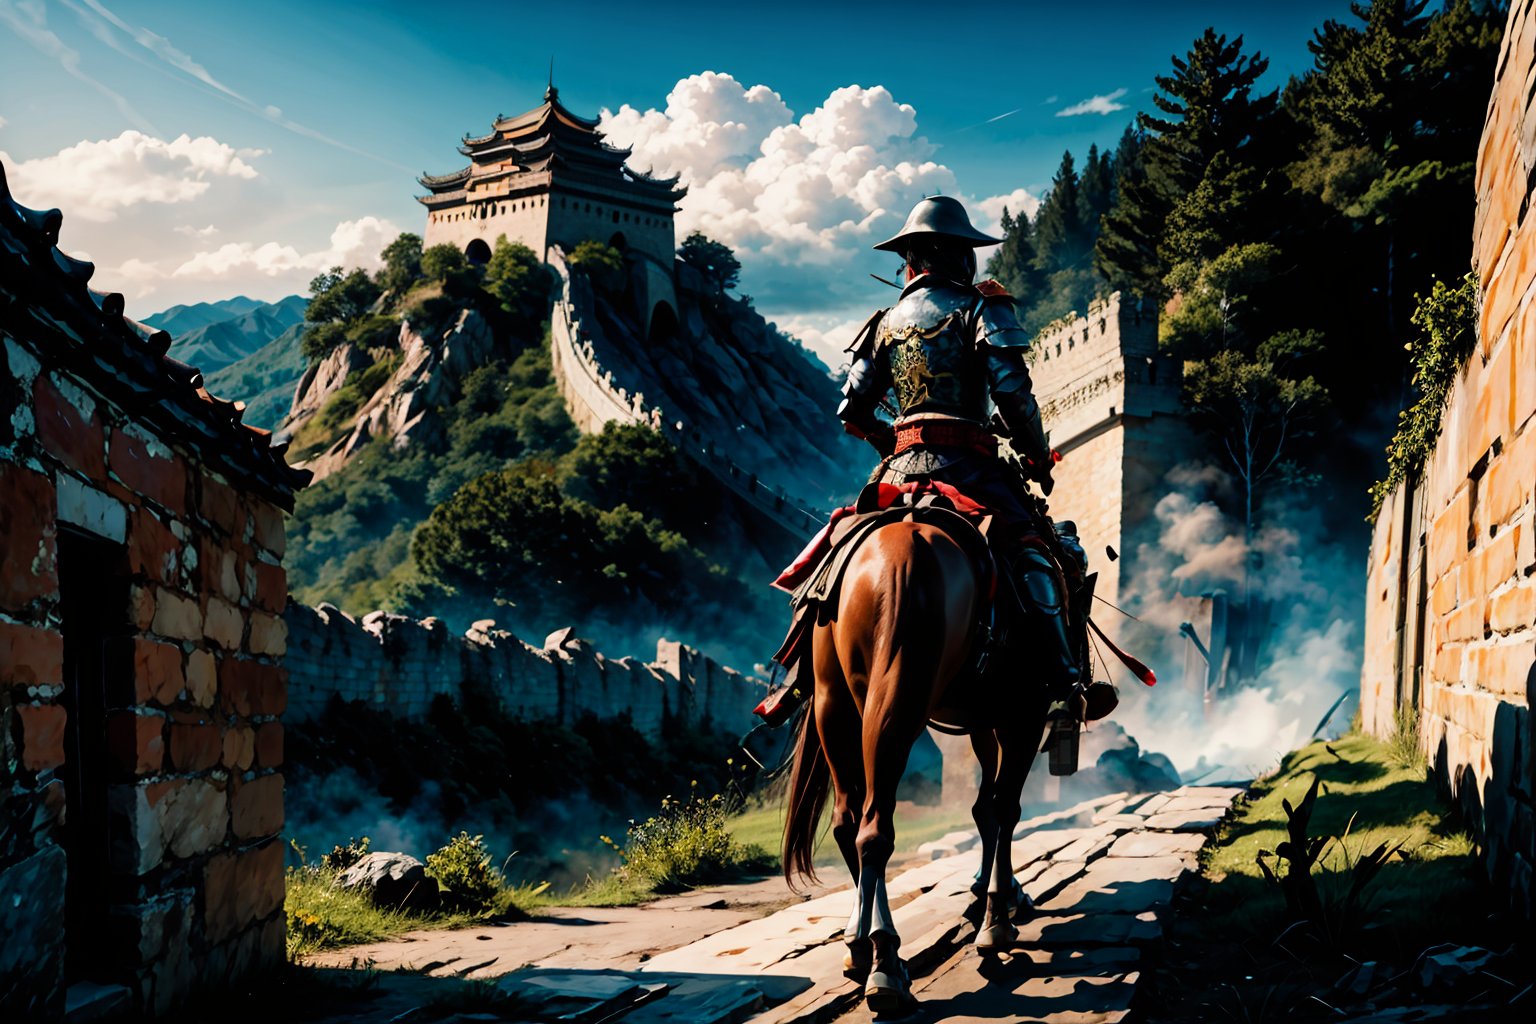 A majestic shot frames an ancient Chinese general atop a mighty war horse. The noble warrior dons full armor, spear at the ready, as he stands guard before the iconic Shanhaiguan Pass. The Great Wall's serpentine structure winds its way through the surrounding mountains, a testament to human ingenuity and perseverance, (MkmCut)